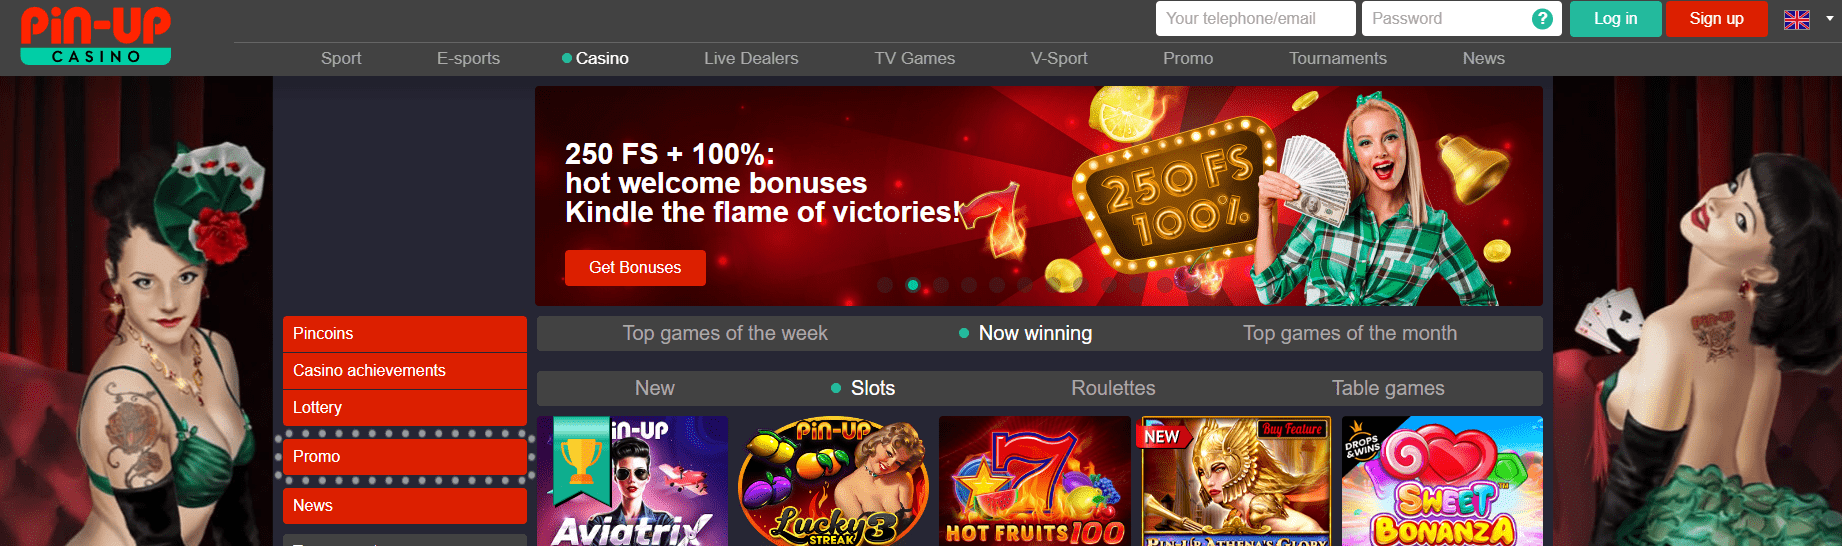 Official Pin-Up Casino website